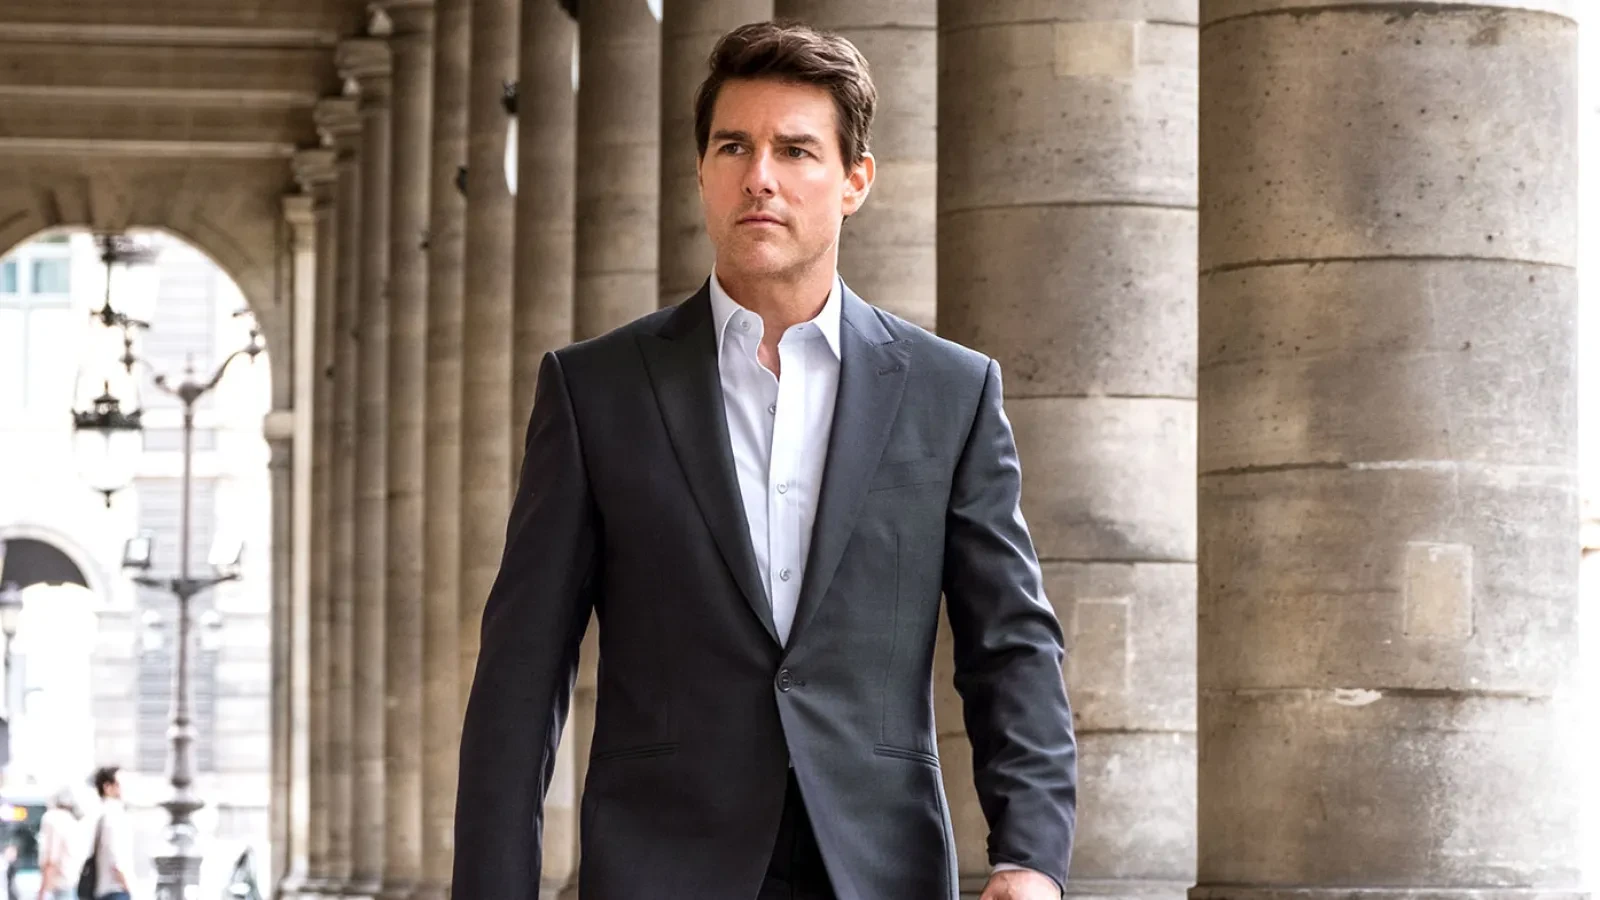 Mission Impossible star Tom Cruise